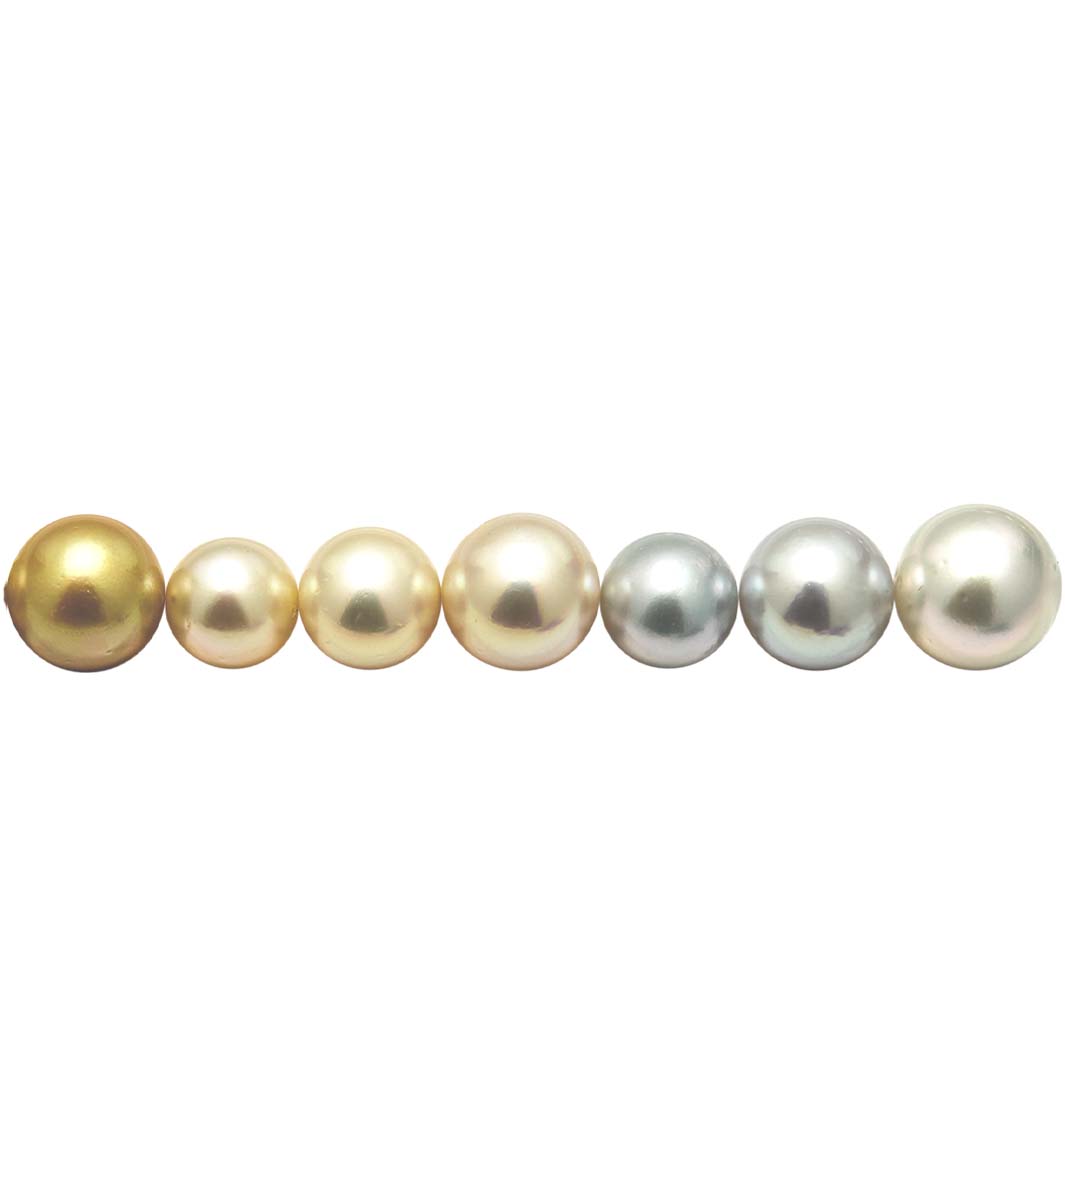 Pearl Care Guide: How to Clean and Maintain Your Pearl Jewellery